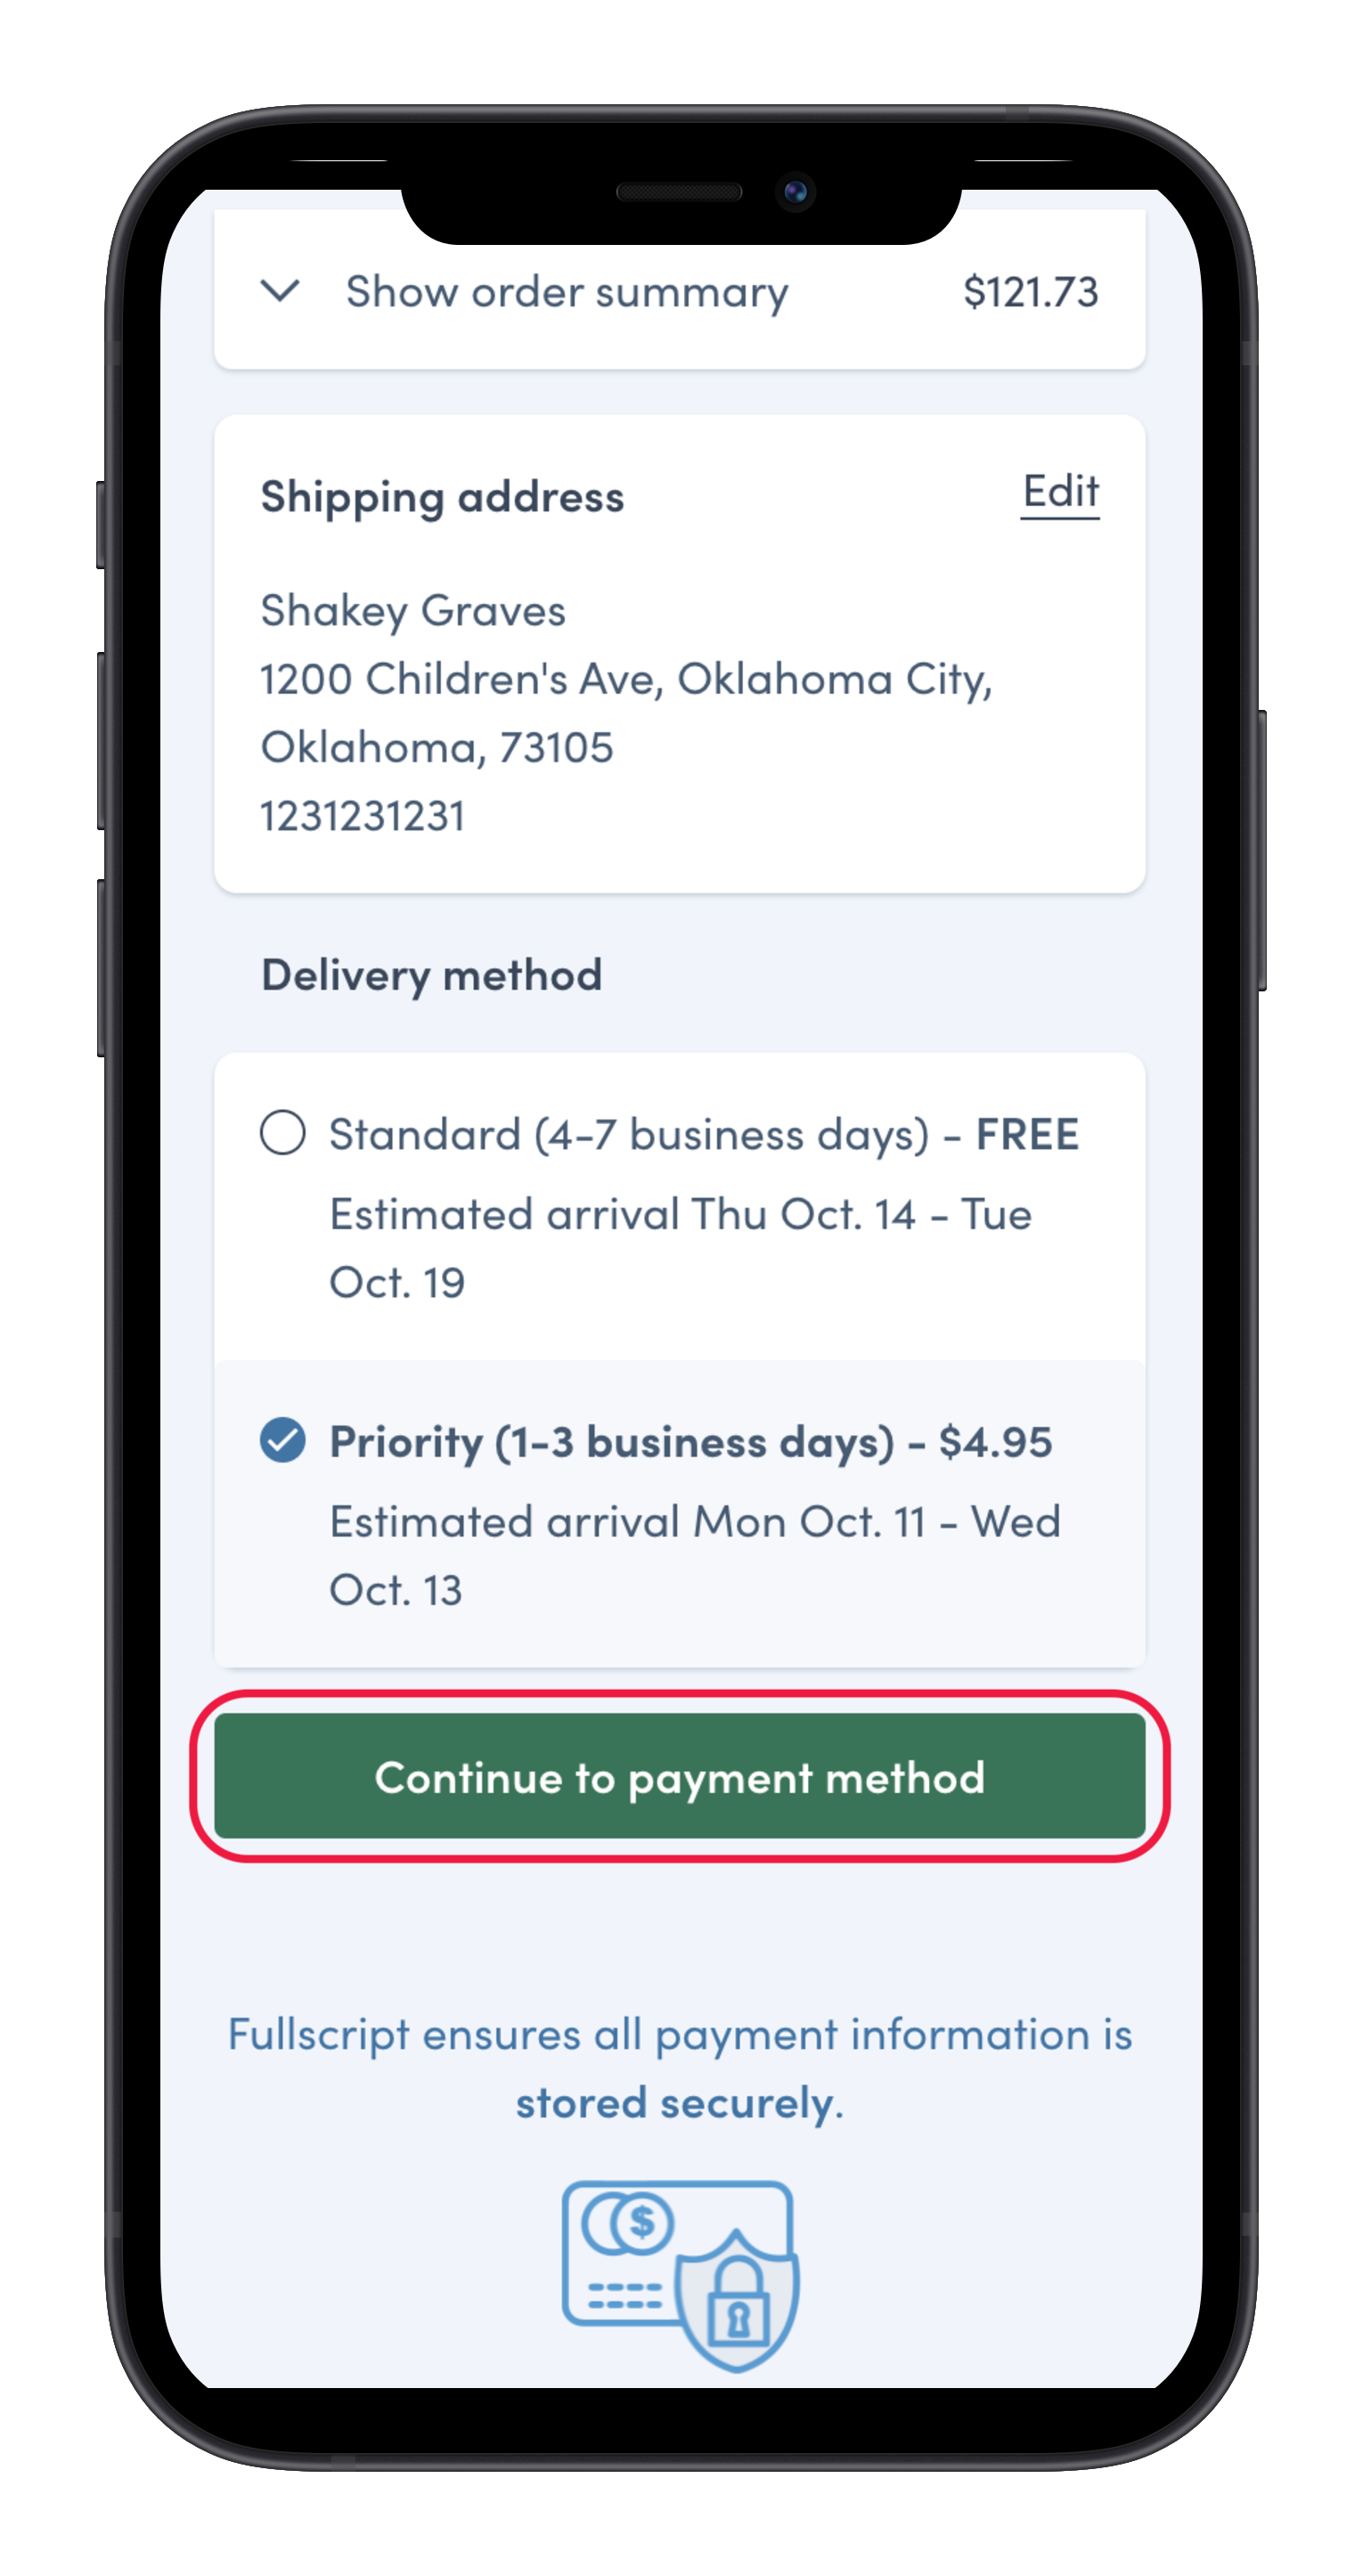 Delivery method selection in checkout